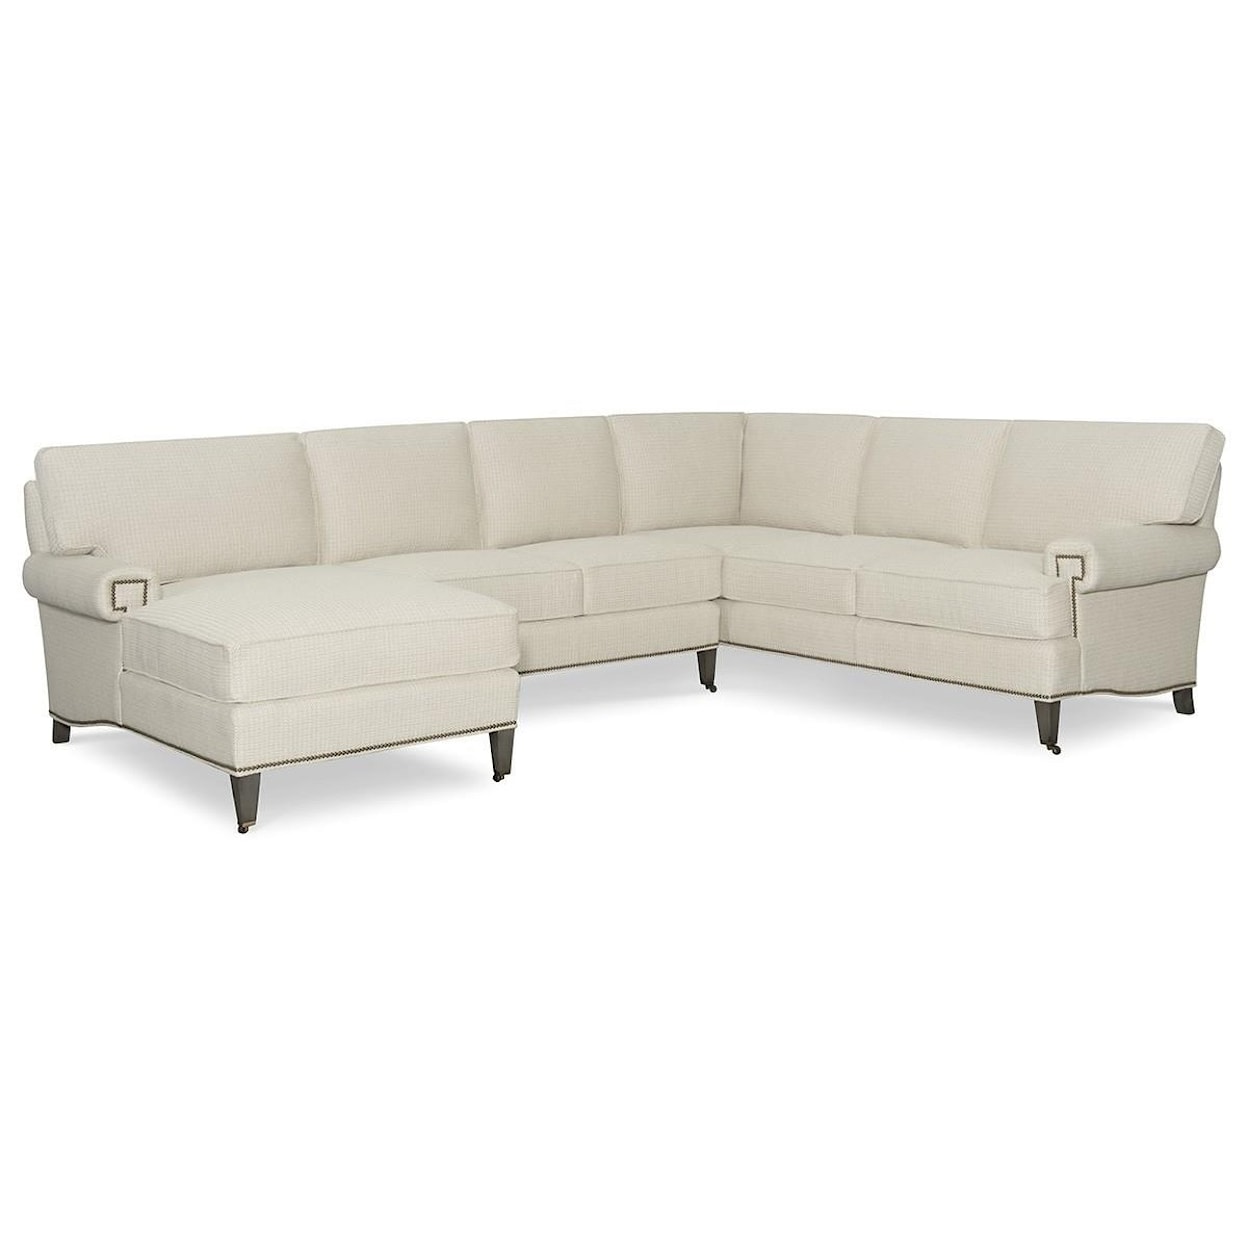 C.R. Laine Custom Design 8800 Series Sectional with Chaise